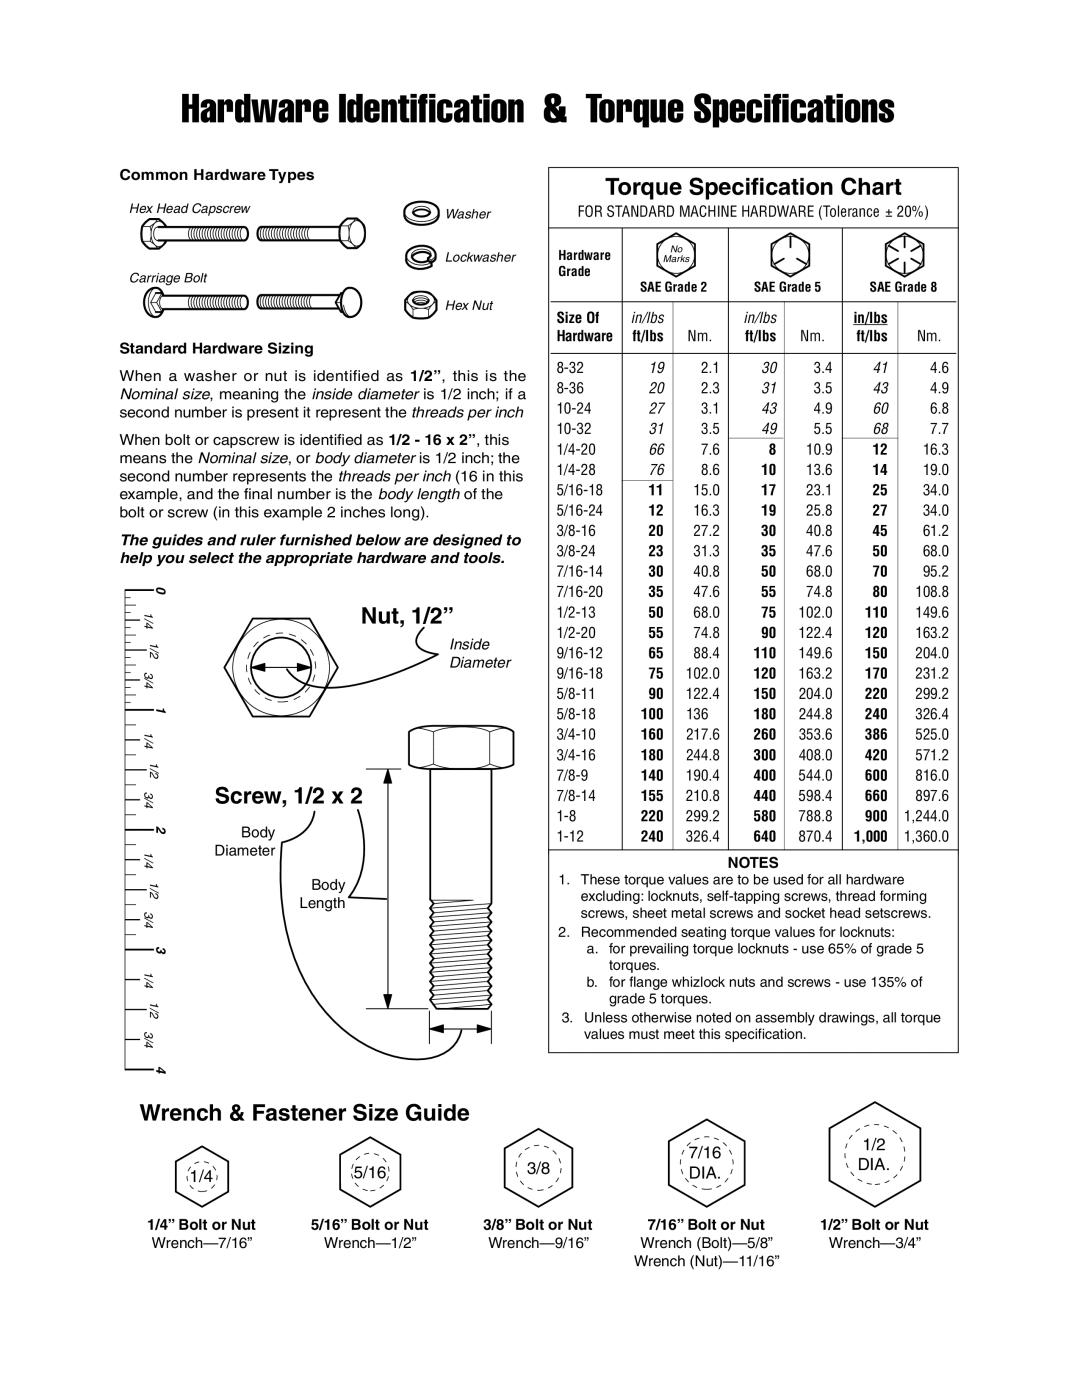 Simplicity 1695299 Wrench & Fastener Size Guide, Hardware Identification & Torque Specifications, Nut, 1/2”, Screw, 1/2 